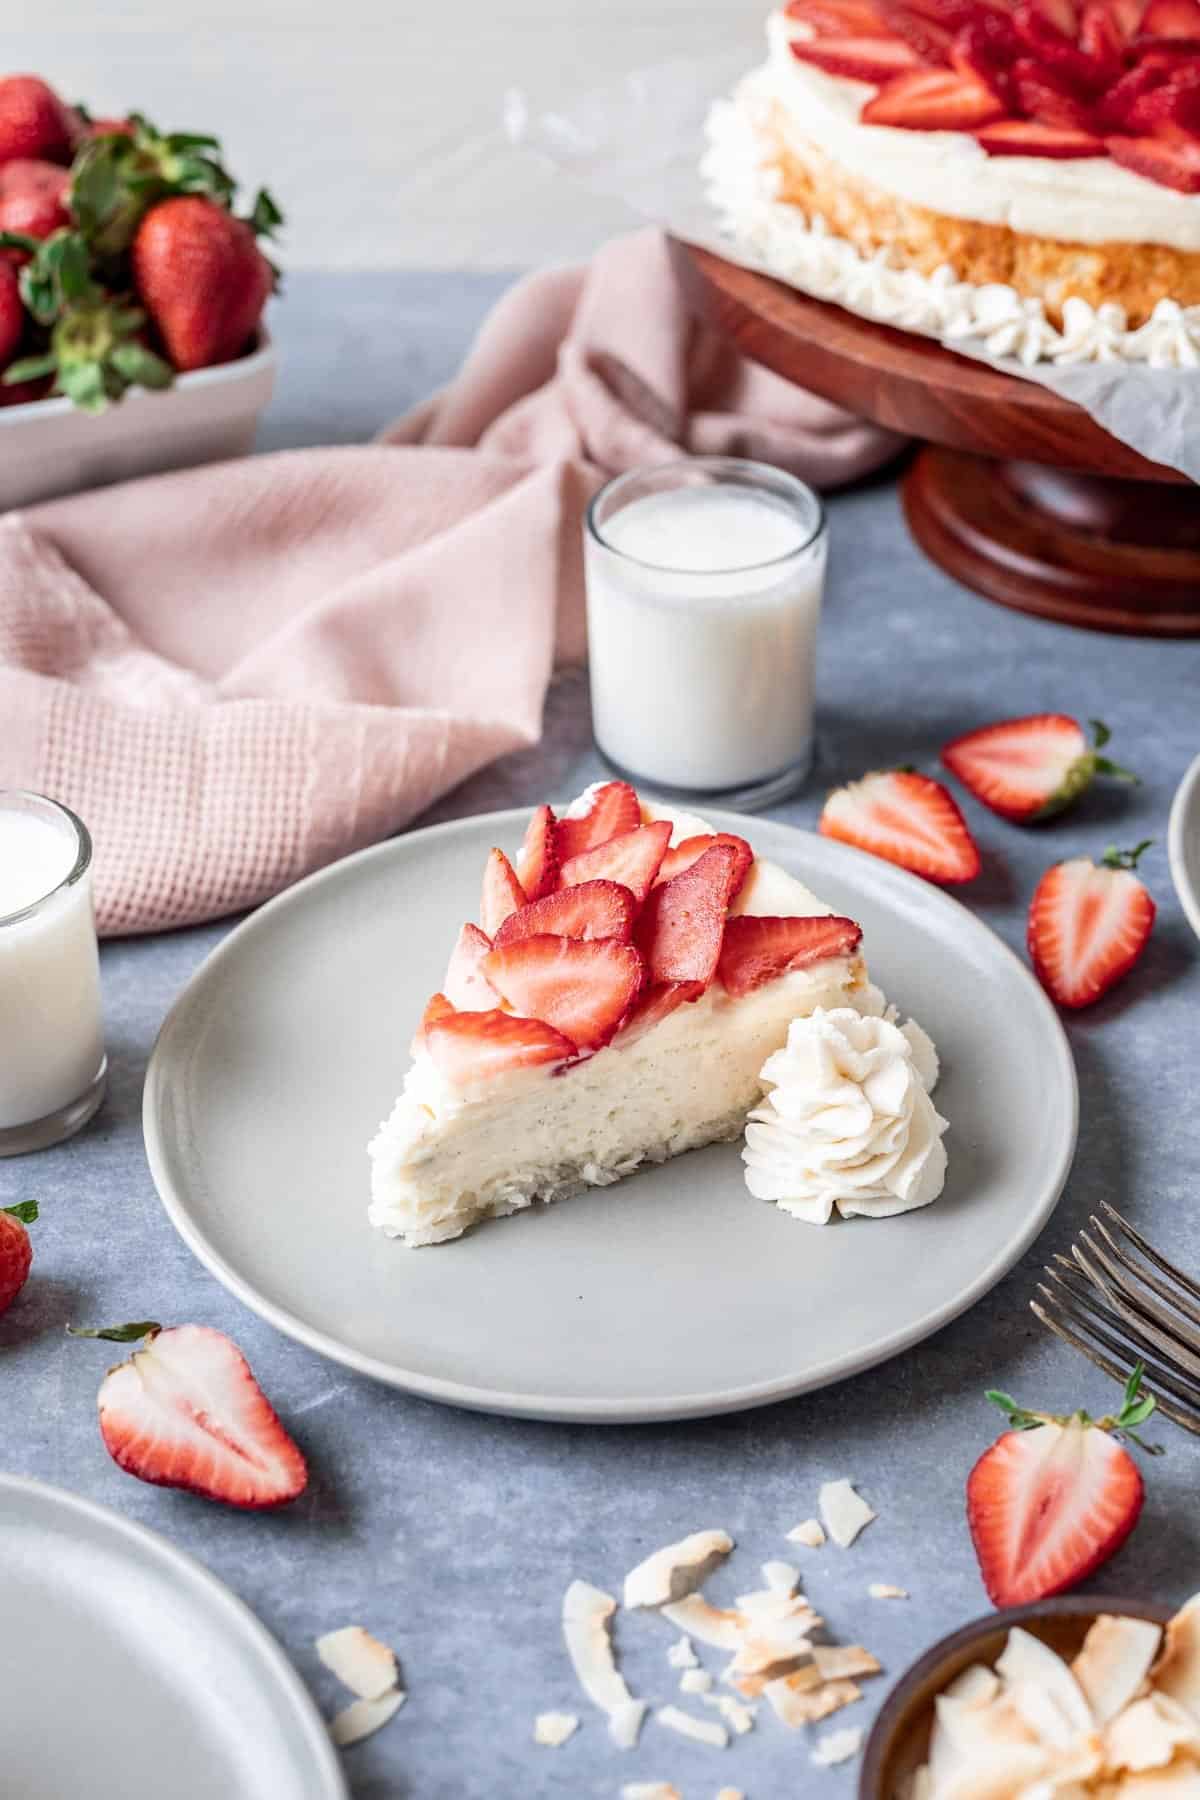 A slice of vanilla bean kosher for passover cheesecake on a gray plate with whipped cream and sliced strawberries.